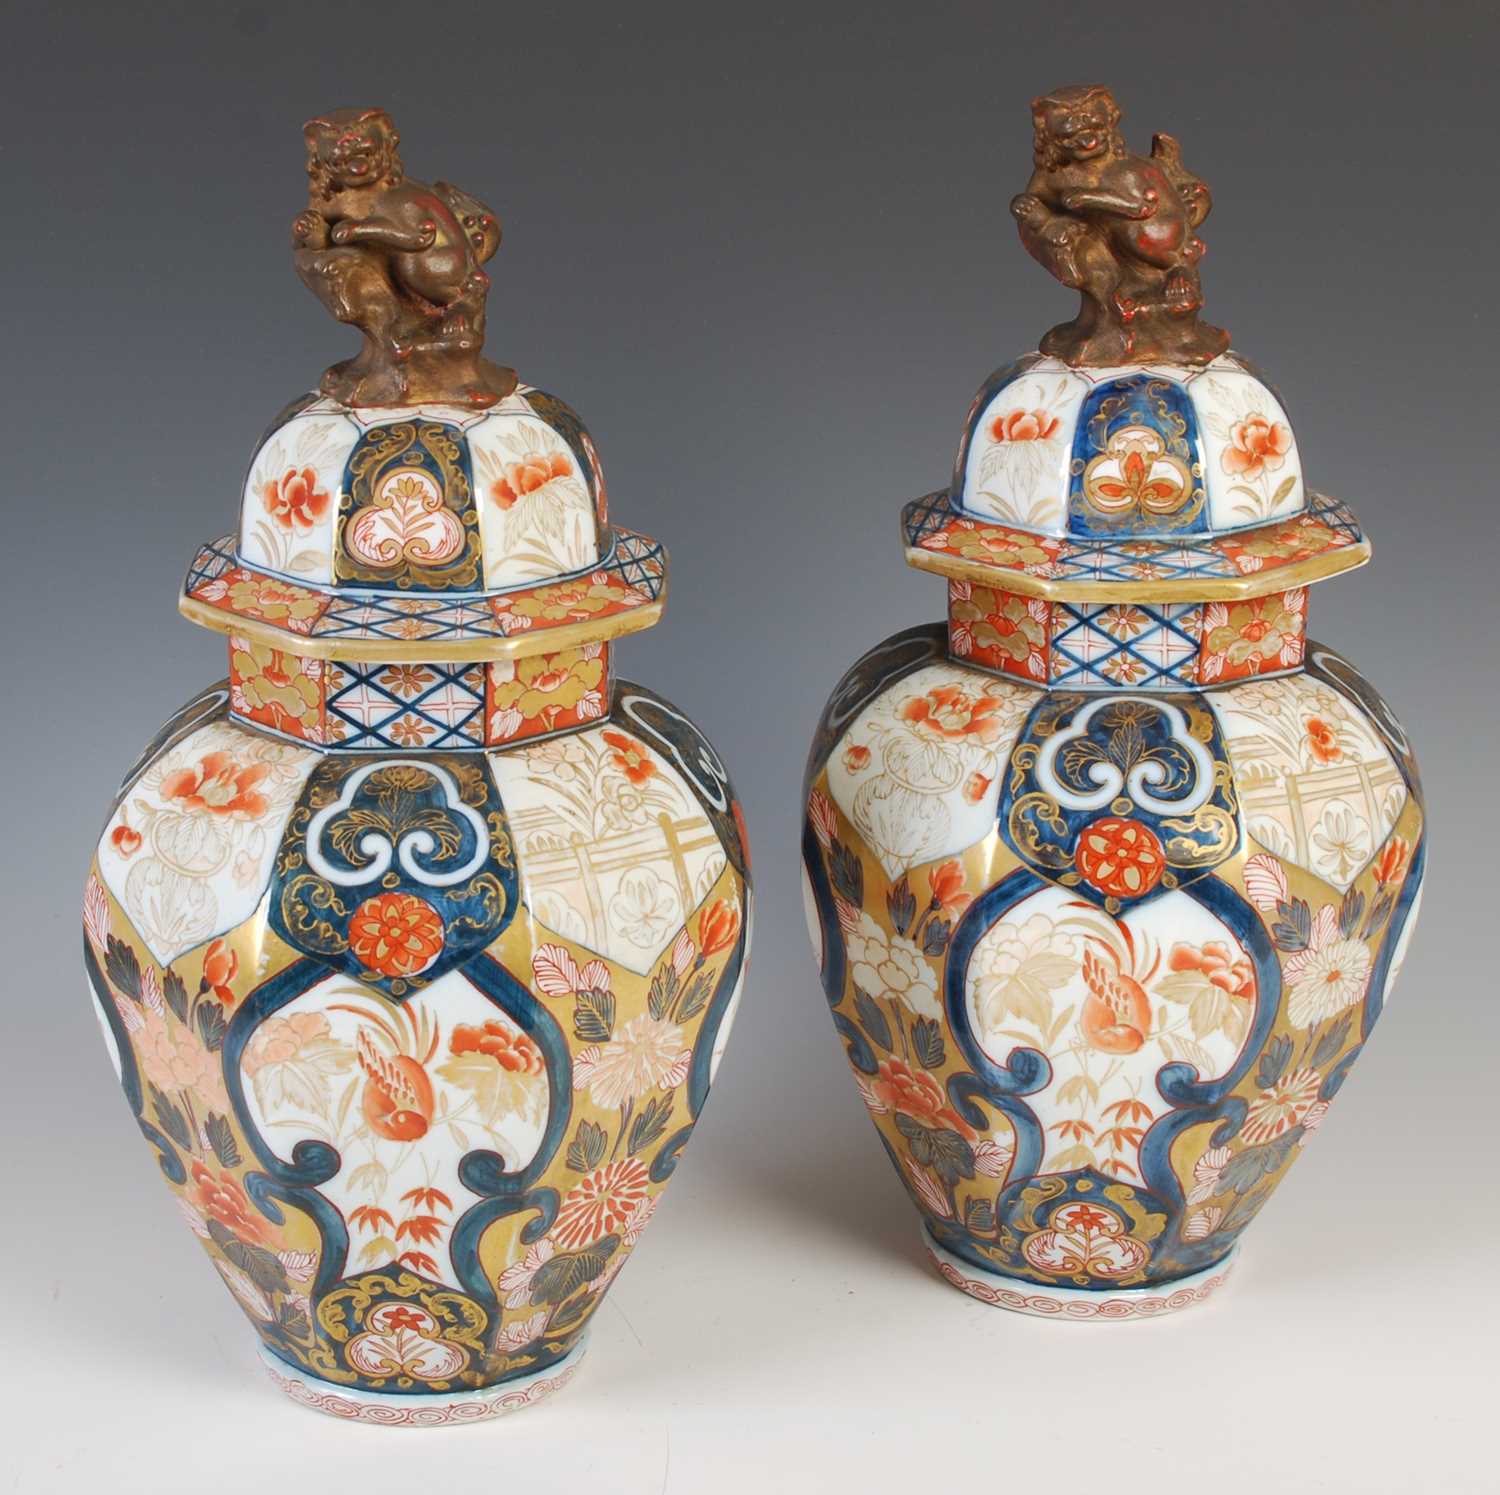 A pair of Japanese Imari porcelain octagonal shaped jars and covers, Meiji Period, decorated with